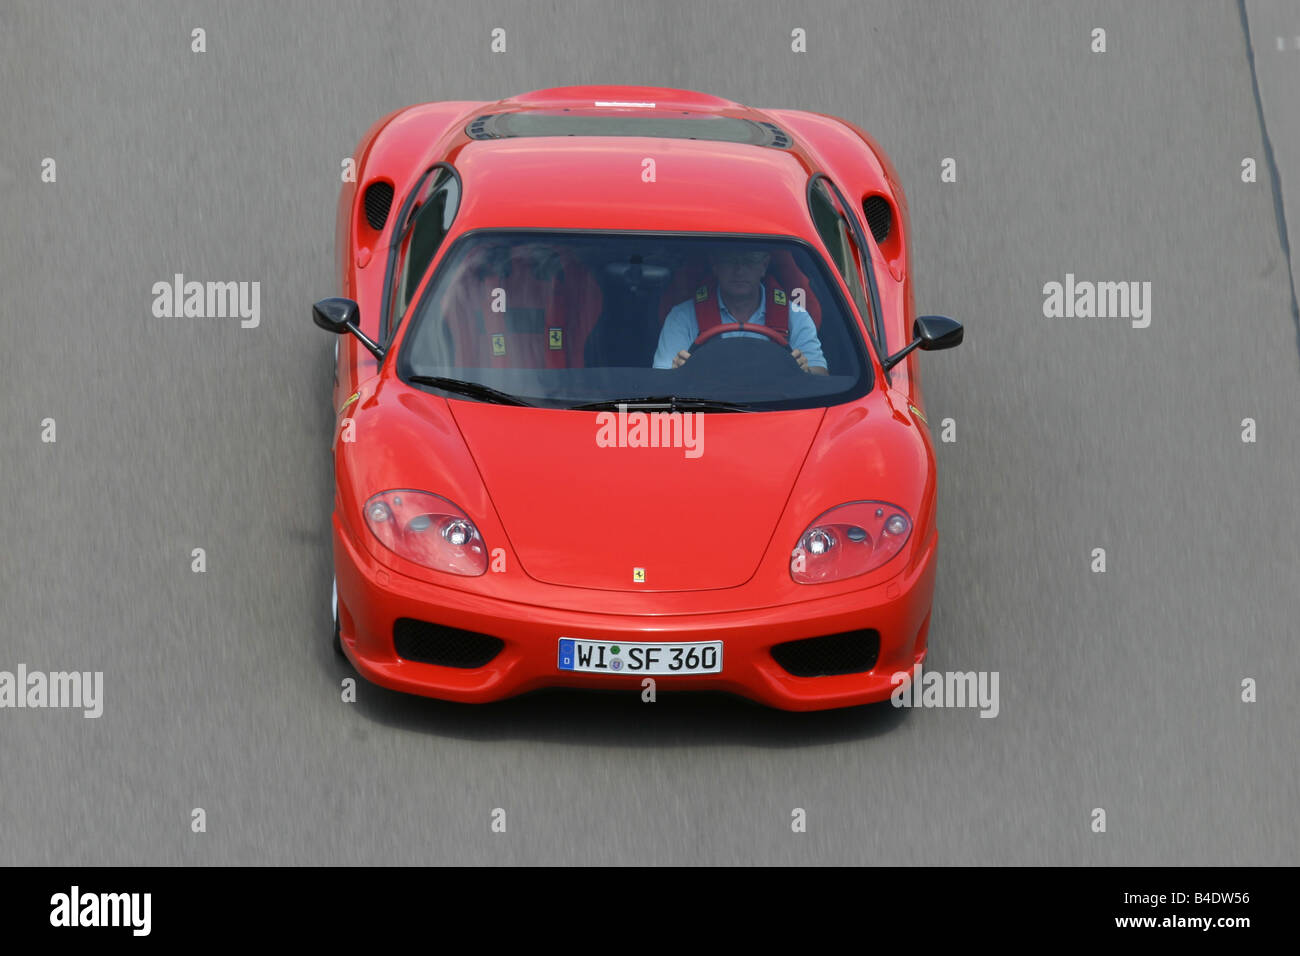 Car, Ferrari 360 Challenge Stradale, roadster, coupe/Coupe, red, standing, upholding, diagonal from above, Front view Stock Photo